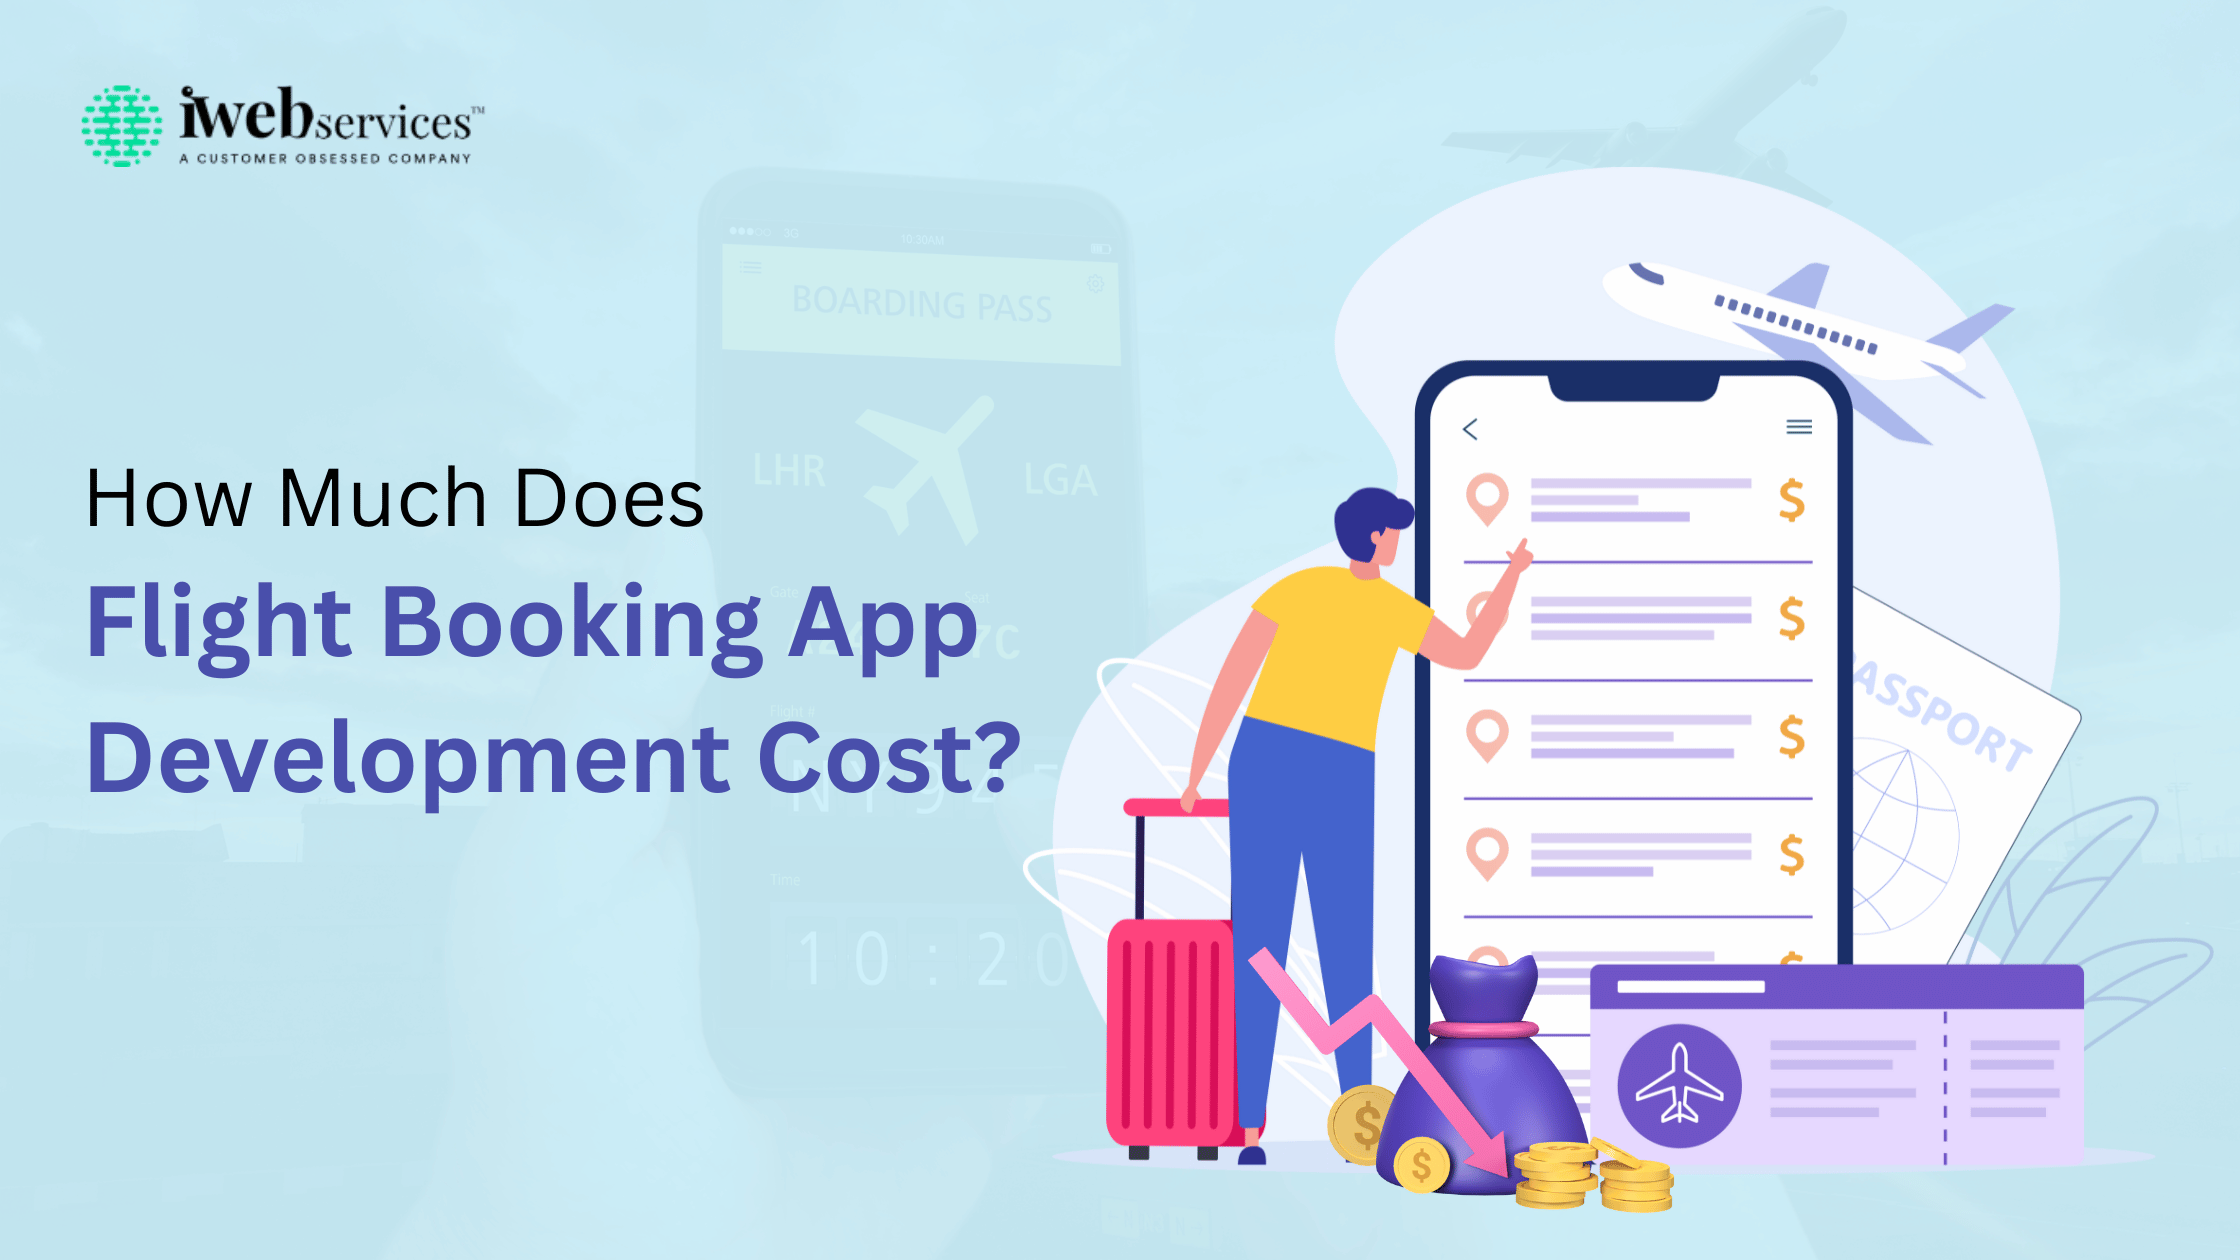 How Much Does Flight Booking App Development Cost?